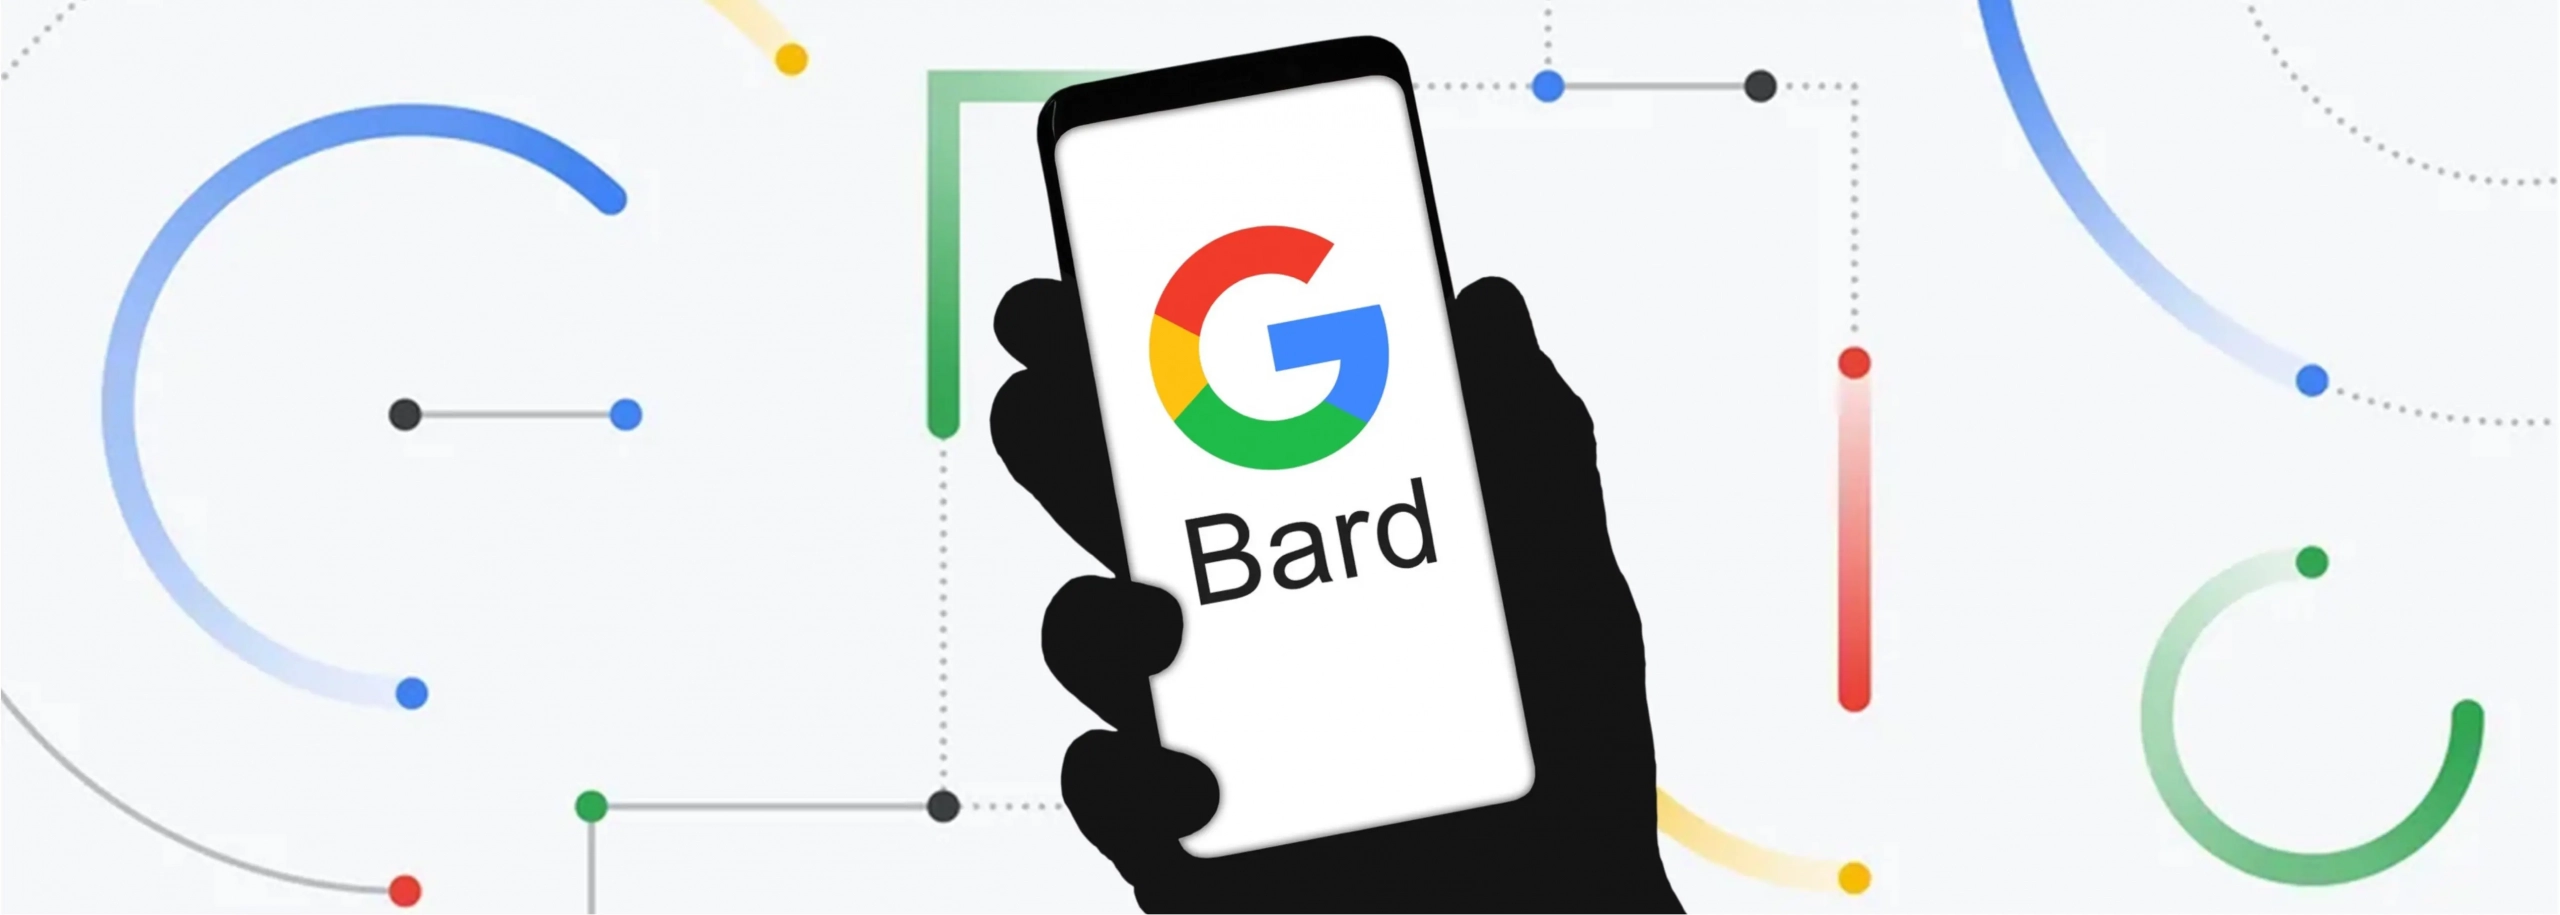 Google Bard: What’s New in July 2023